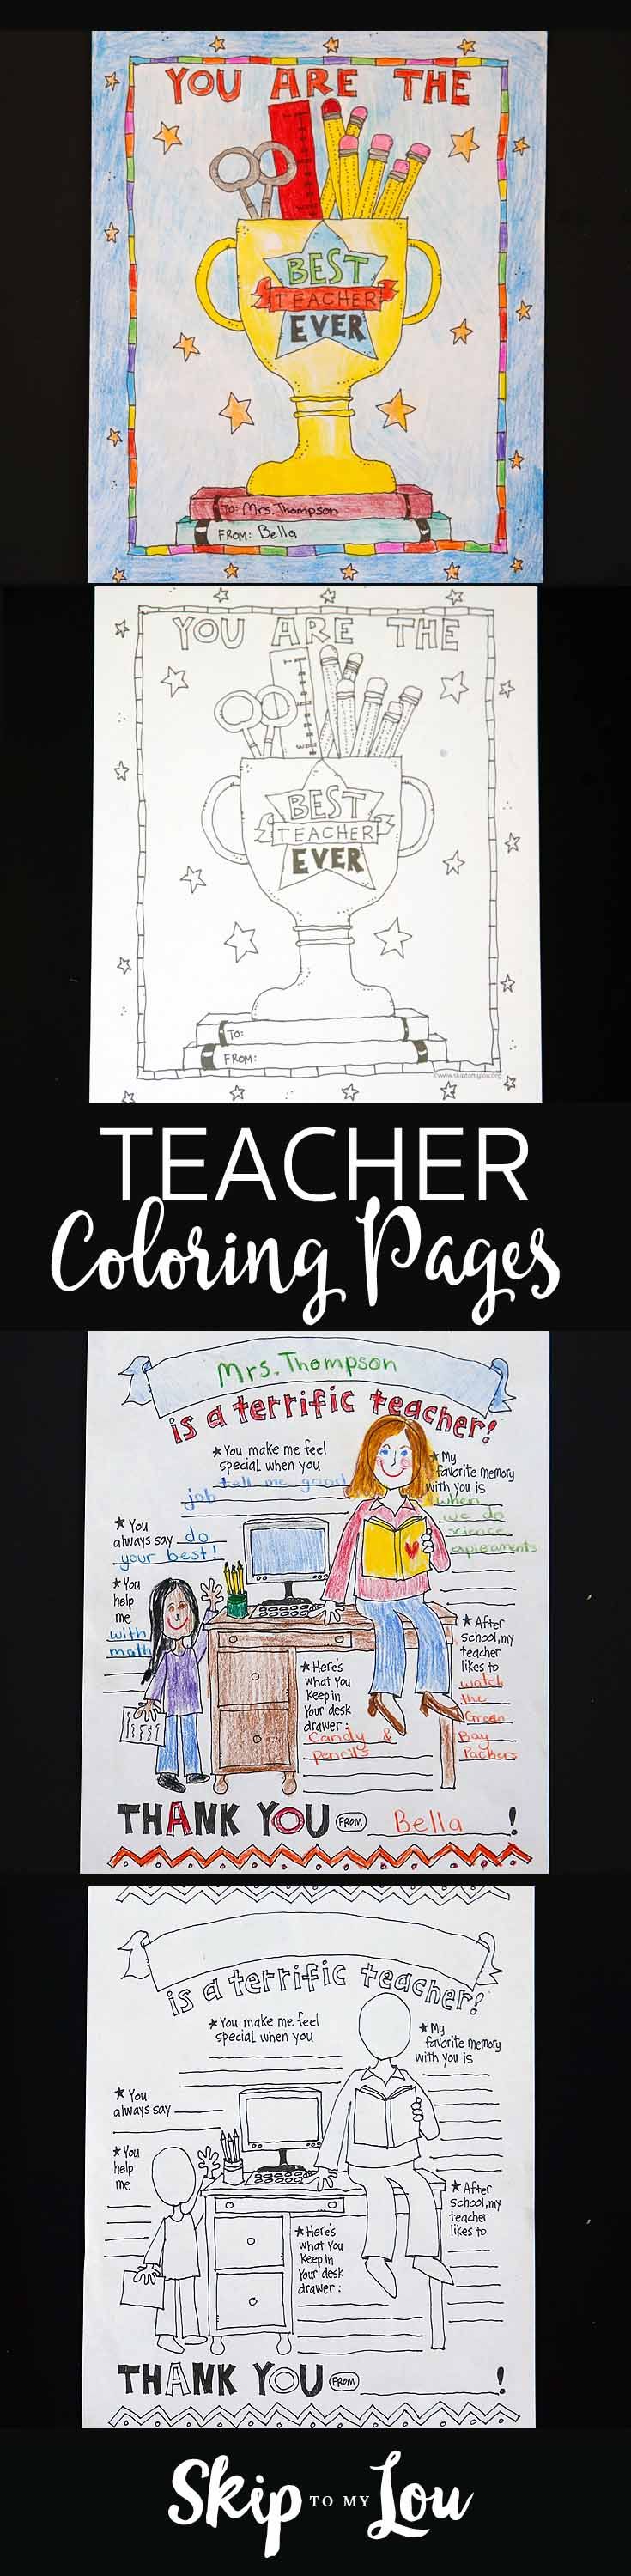 Print at home coloring pages for teacher a appreciation gift!